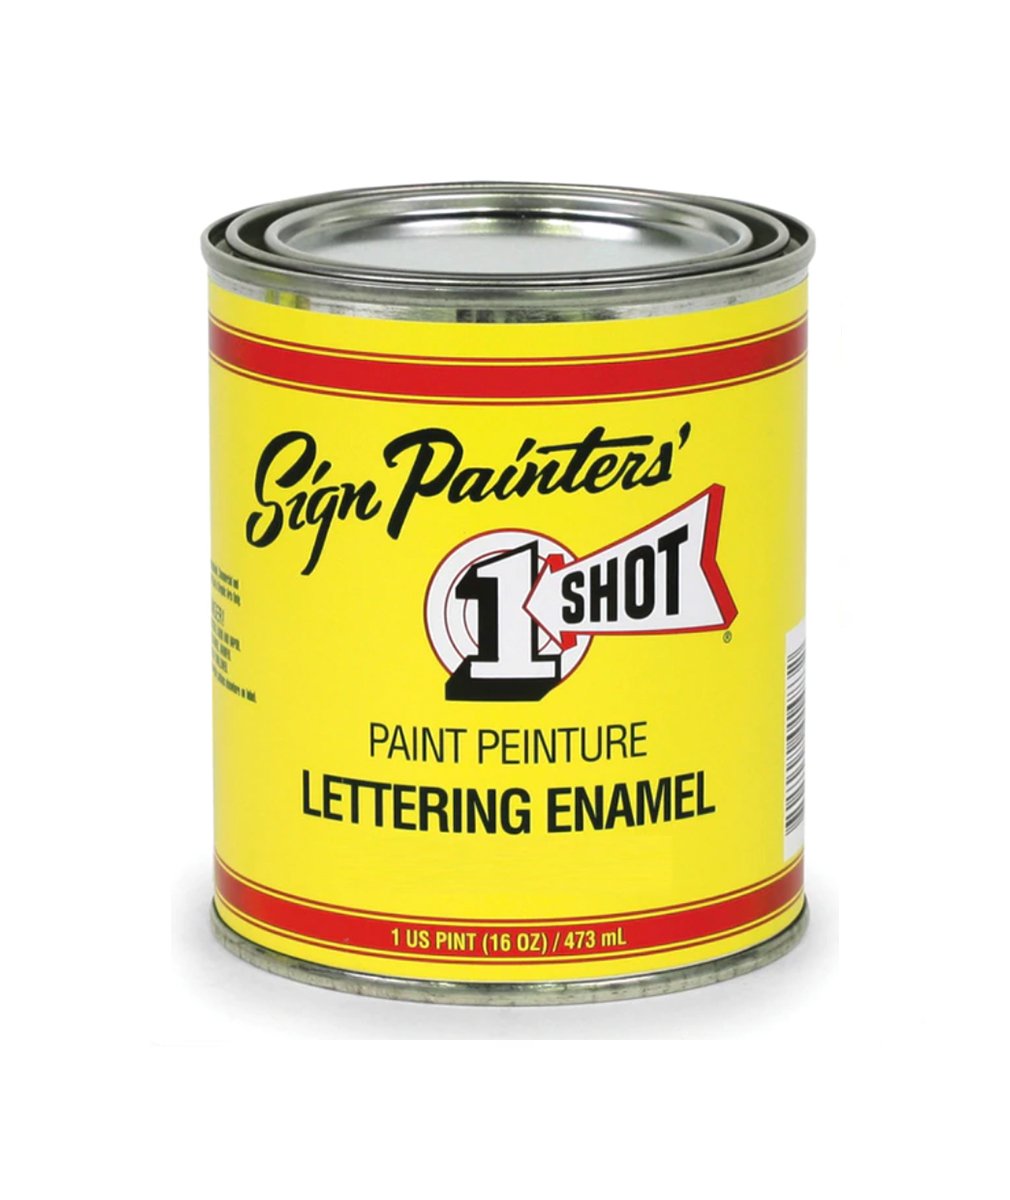 One Shot Lettering Enamels, available at Clement's Paint in Austin, TX.